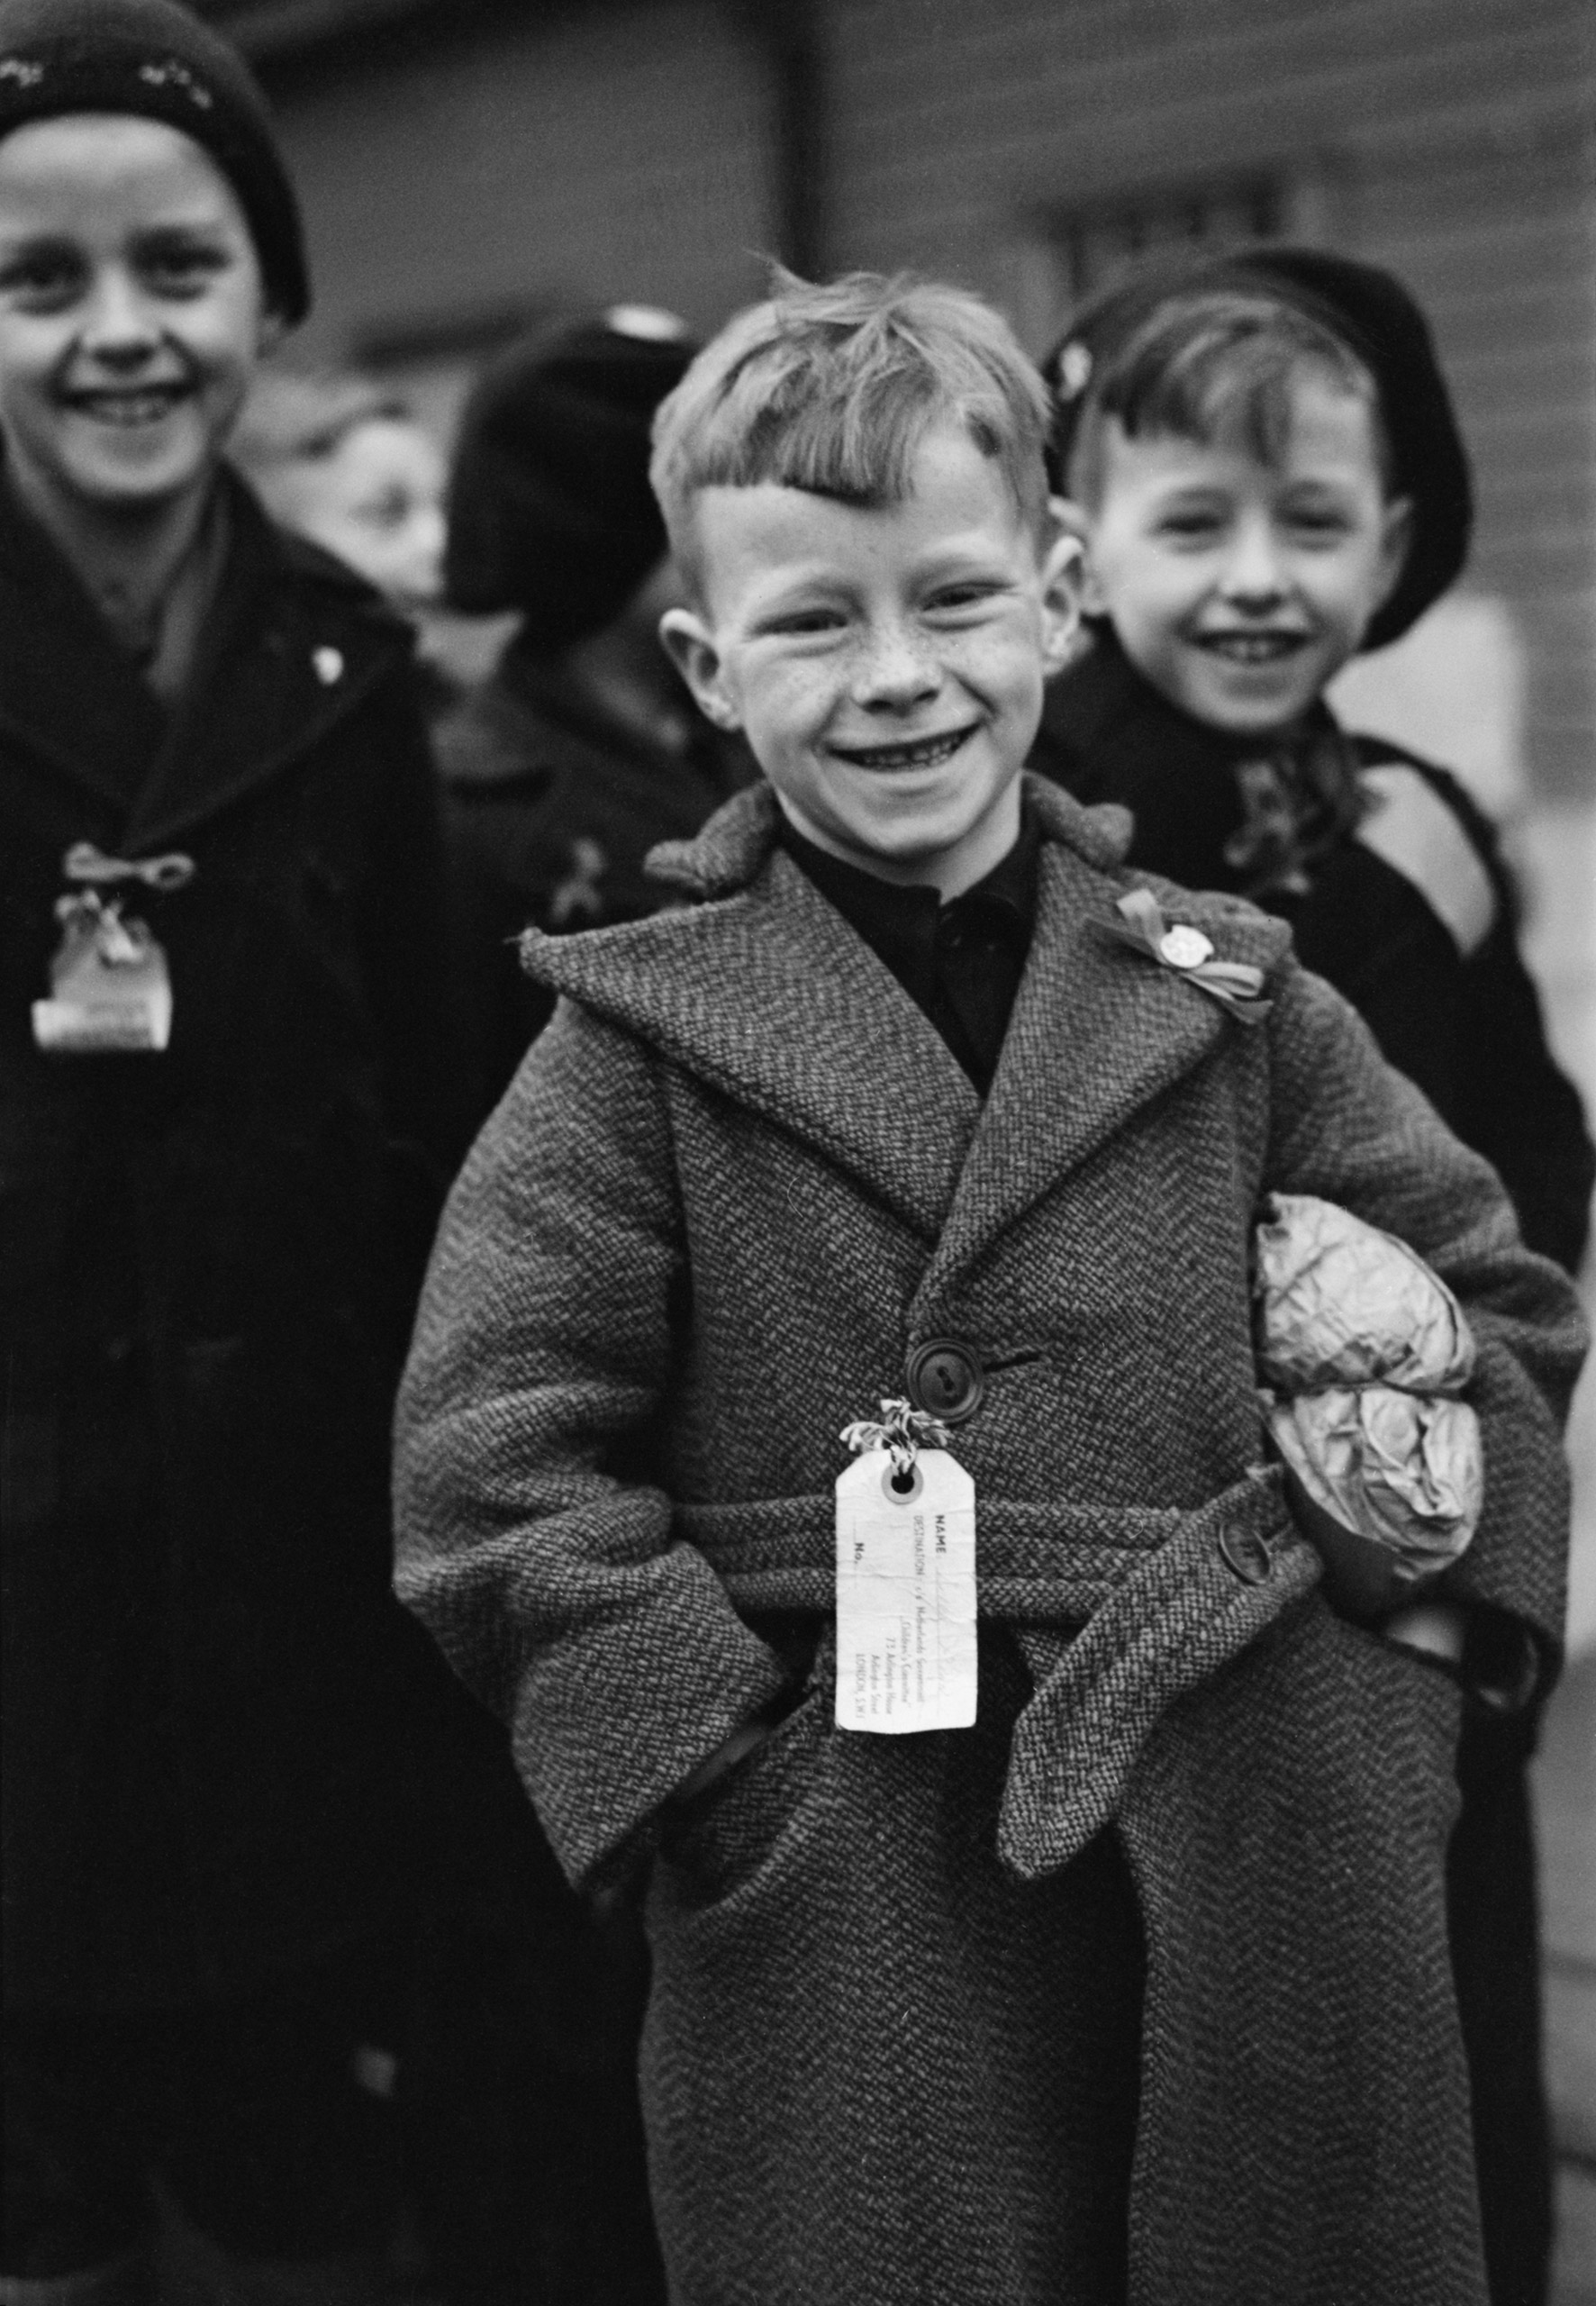 Dutch Child Refugees: Arrival In Britain At Tilbury, Essex, England, UK, 1945, A small Dutch boy smiles for the camera upon arrival at Tilbury in Essex. He is carrying a small paper parcel under his arm, which contains all his luggage. He, and the other children, (some of whom can be seen behind him) all have labels pinned to their coats which bear their names, home address and destination, 11 March 1945.